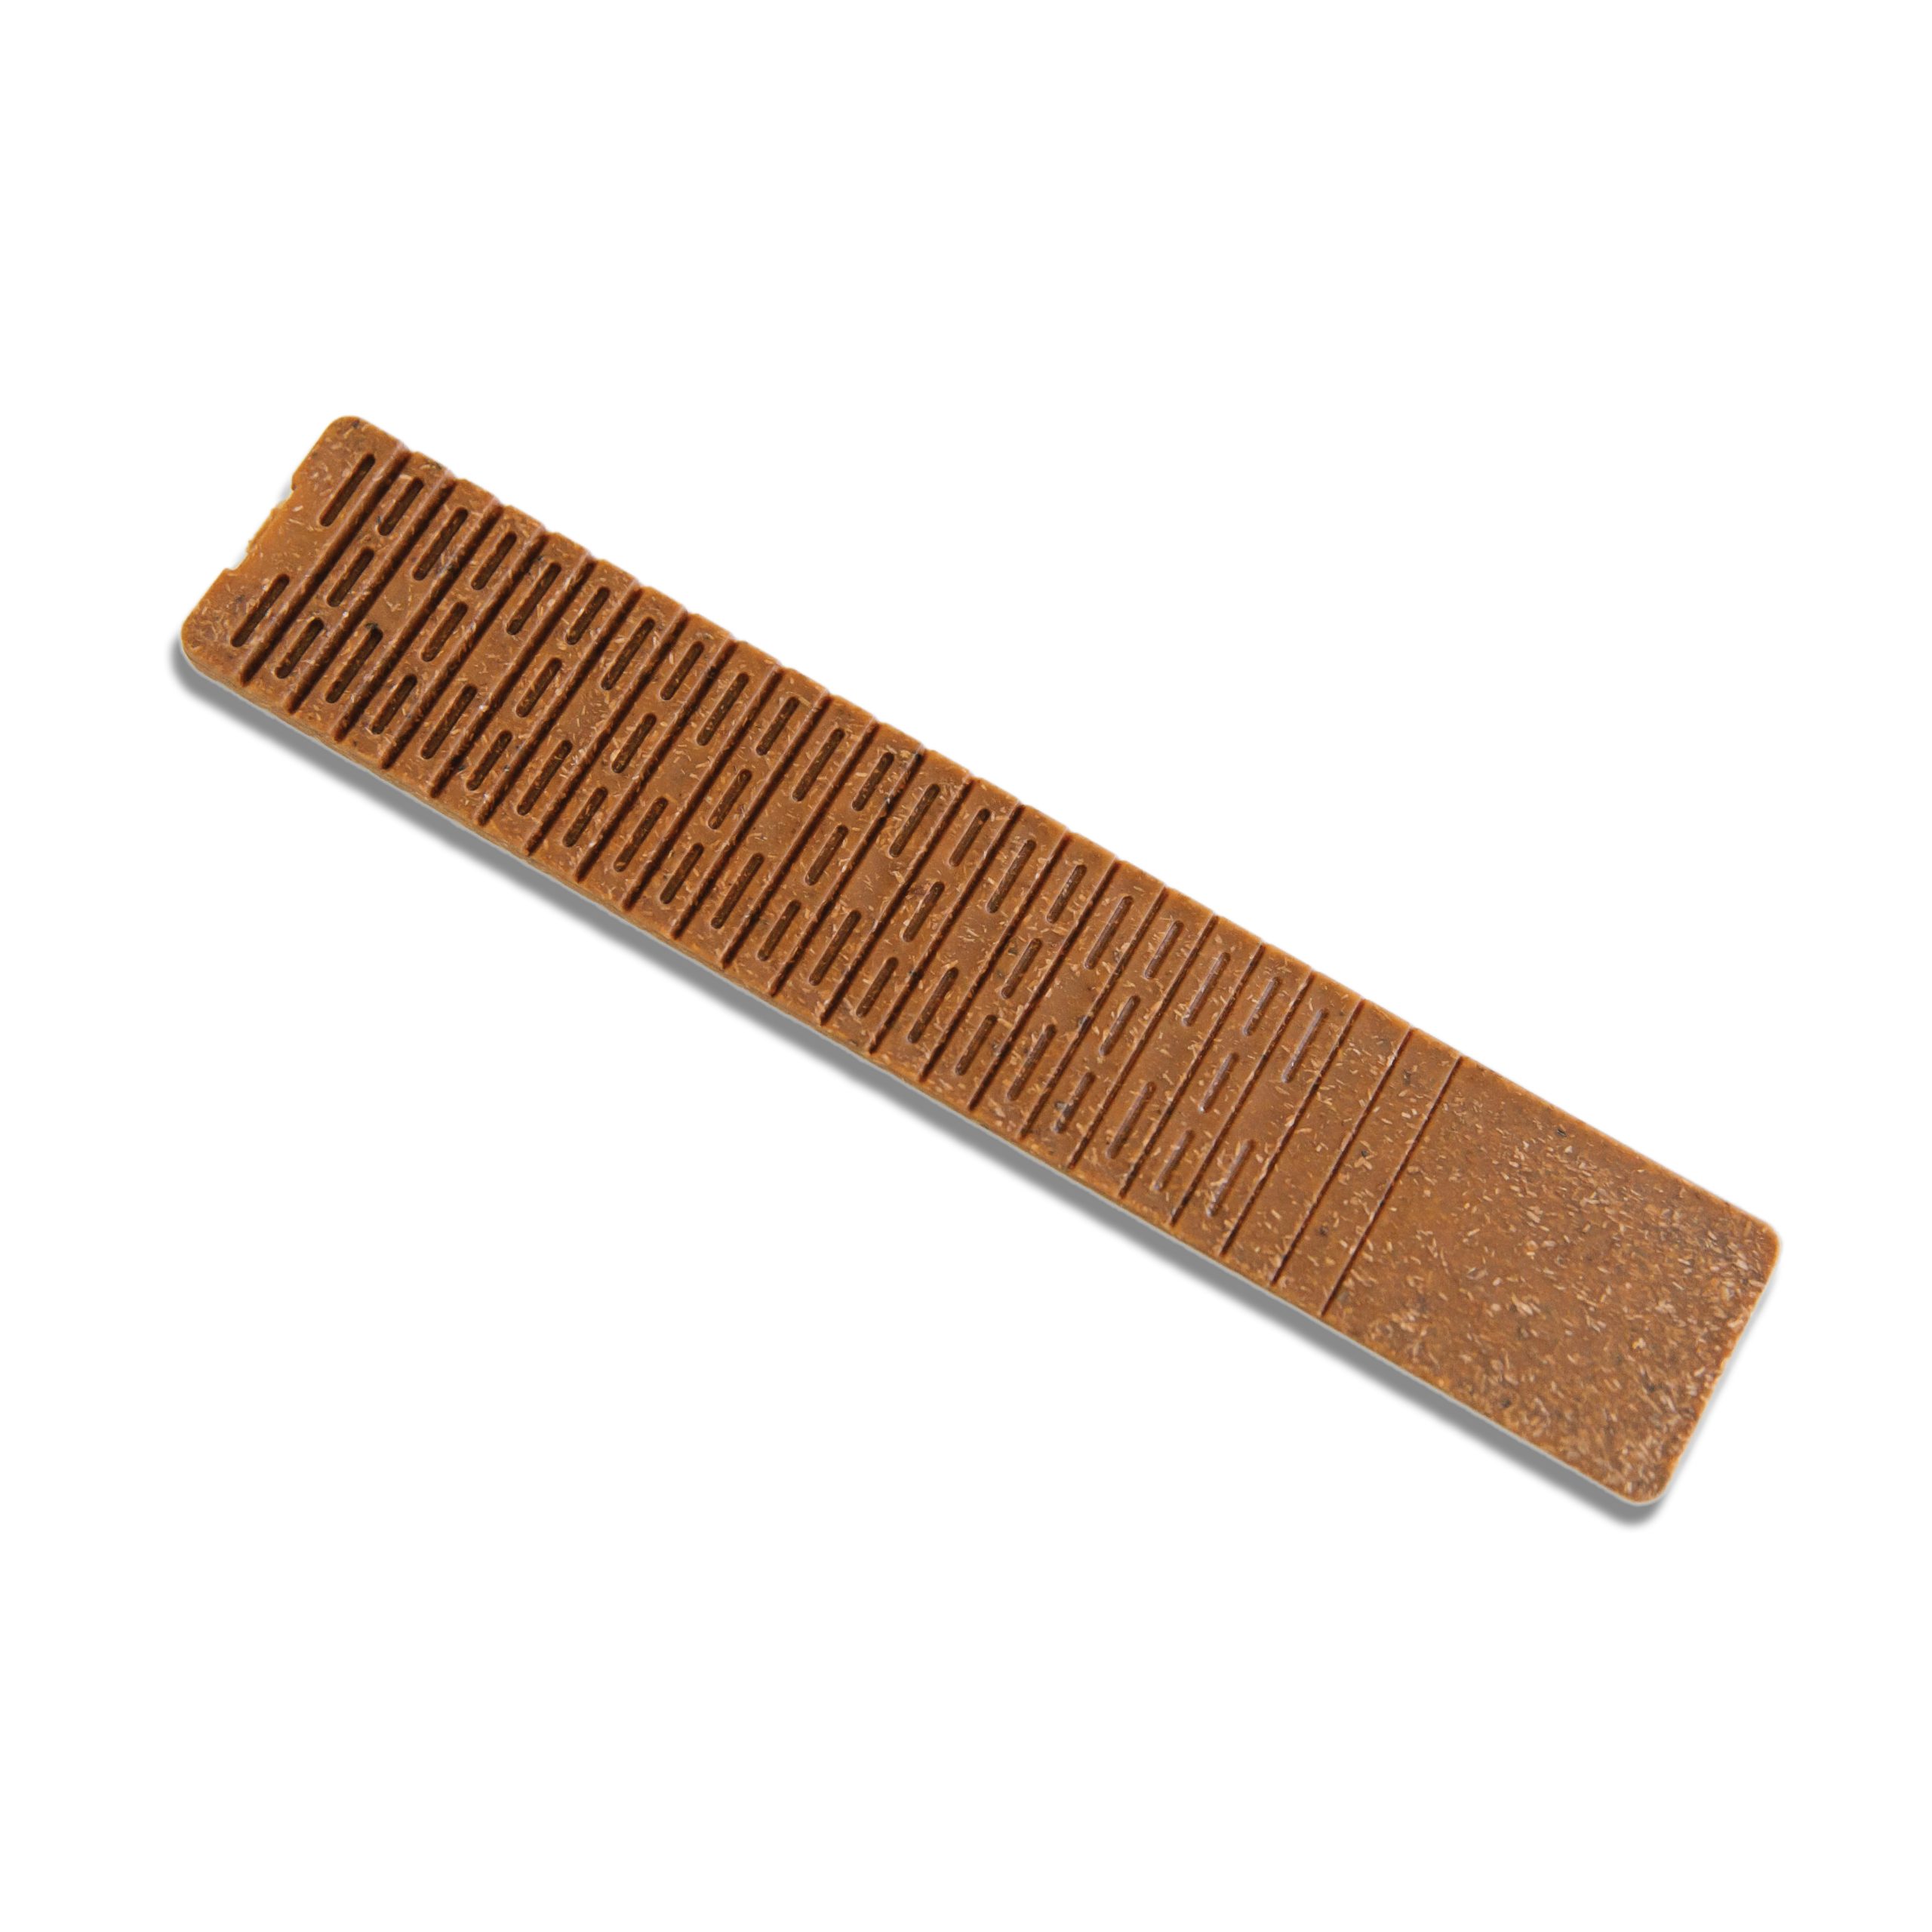 Nelson Wood Shims WC8/32/15/50-LA Composite Shims, 8 x 1-3/8-In